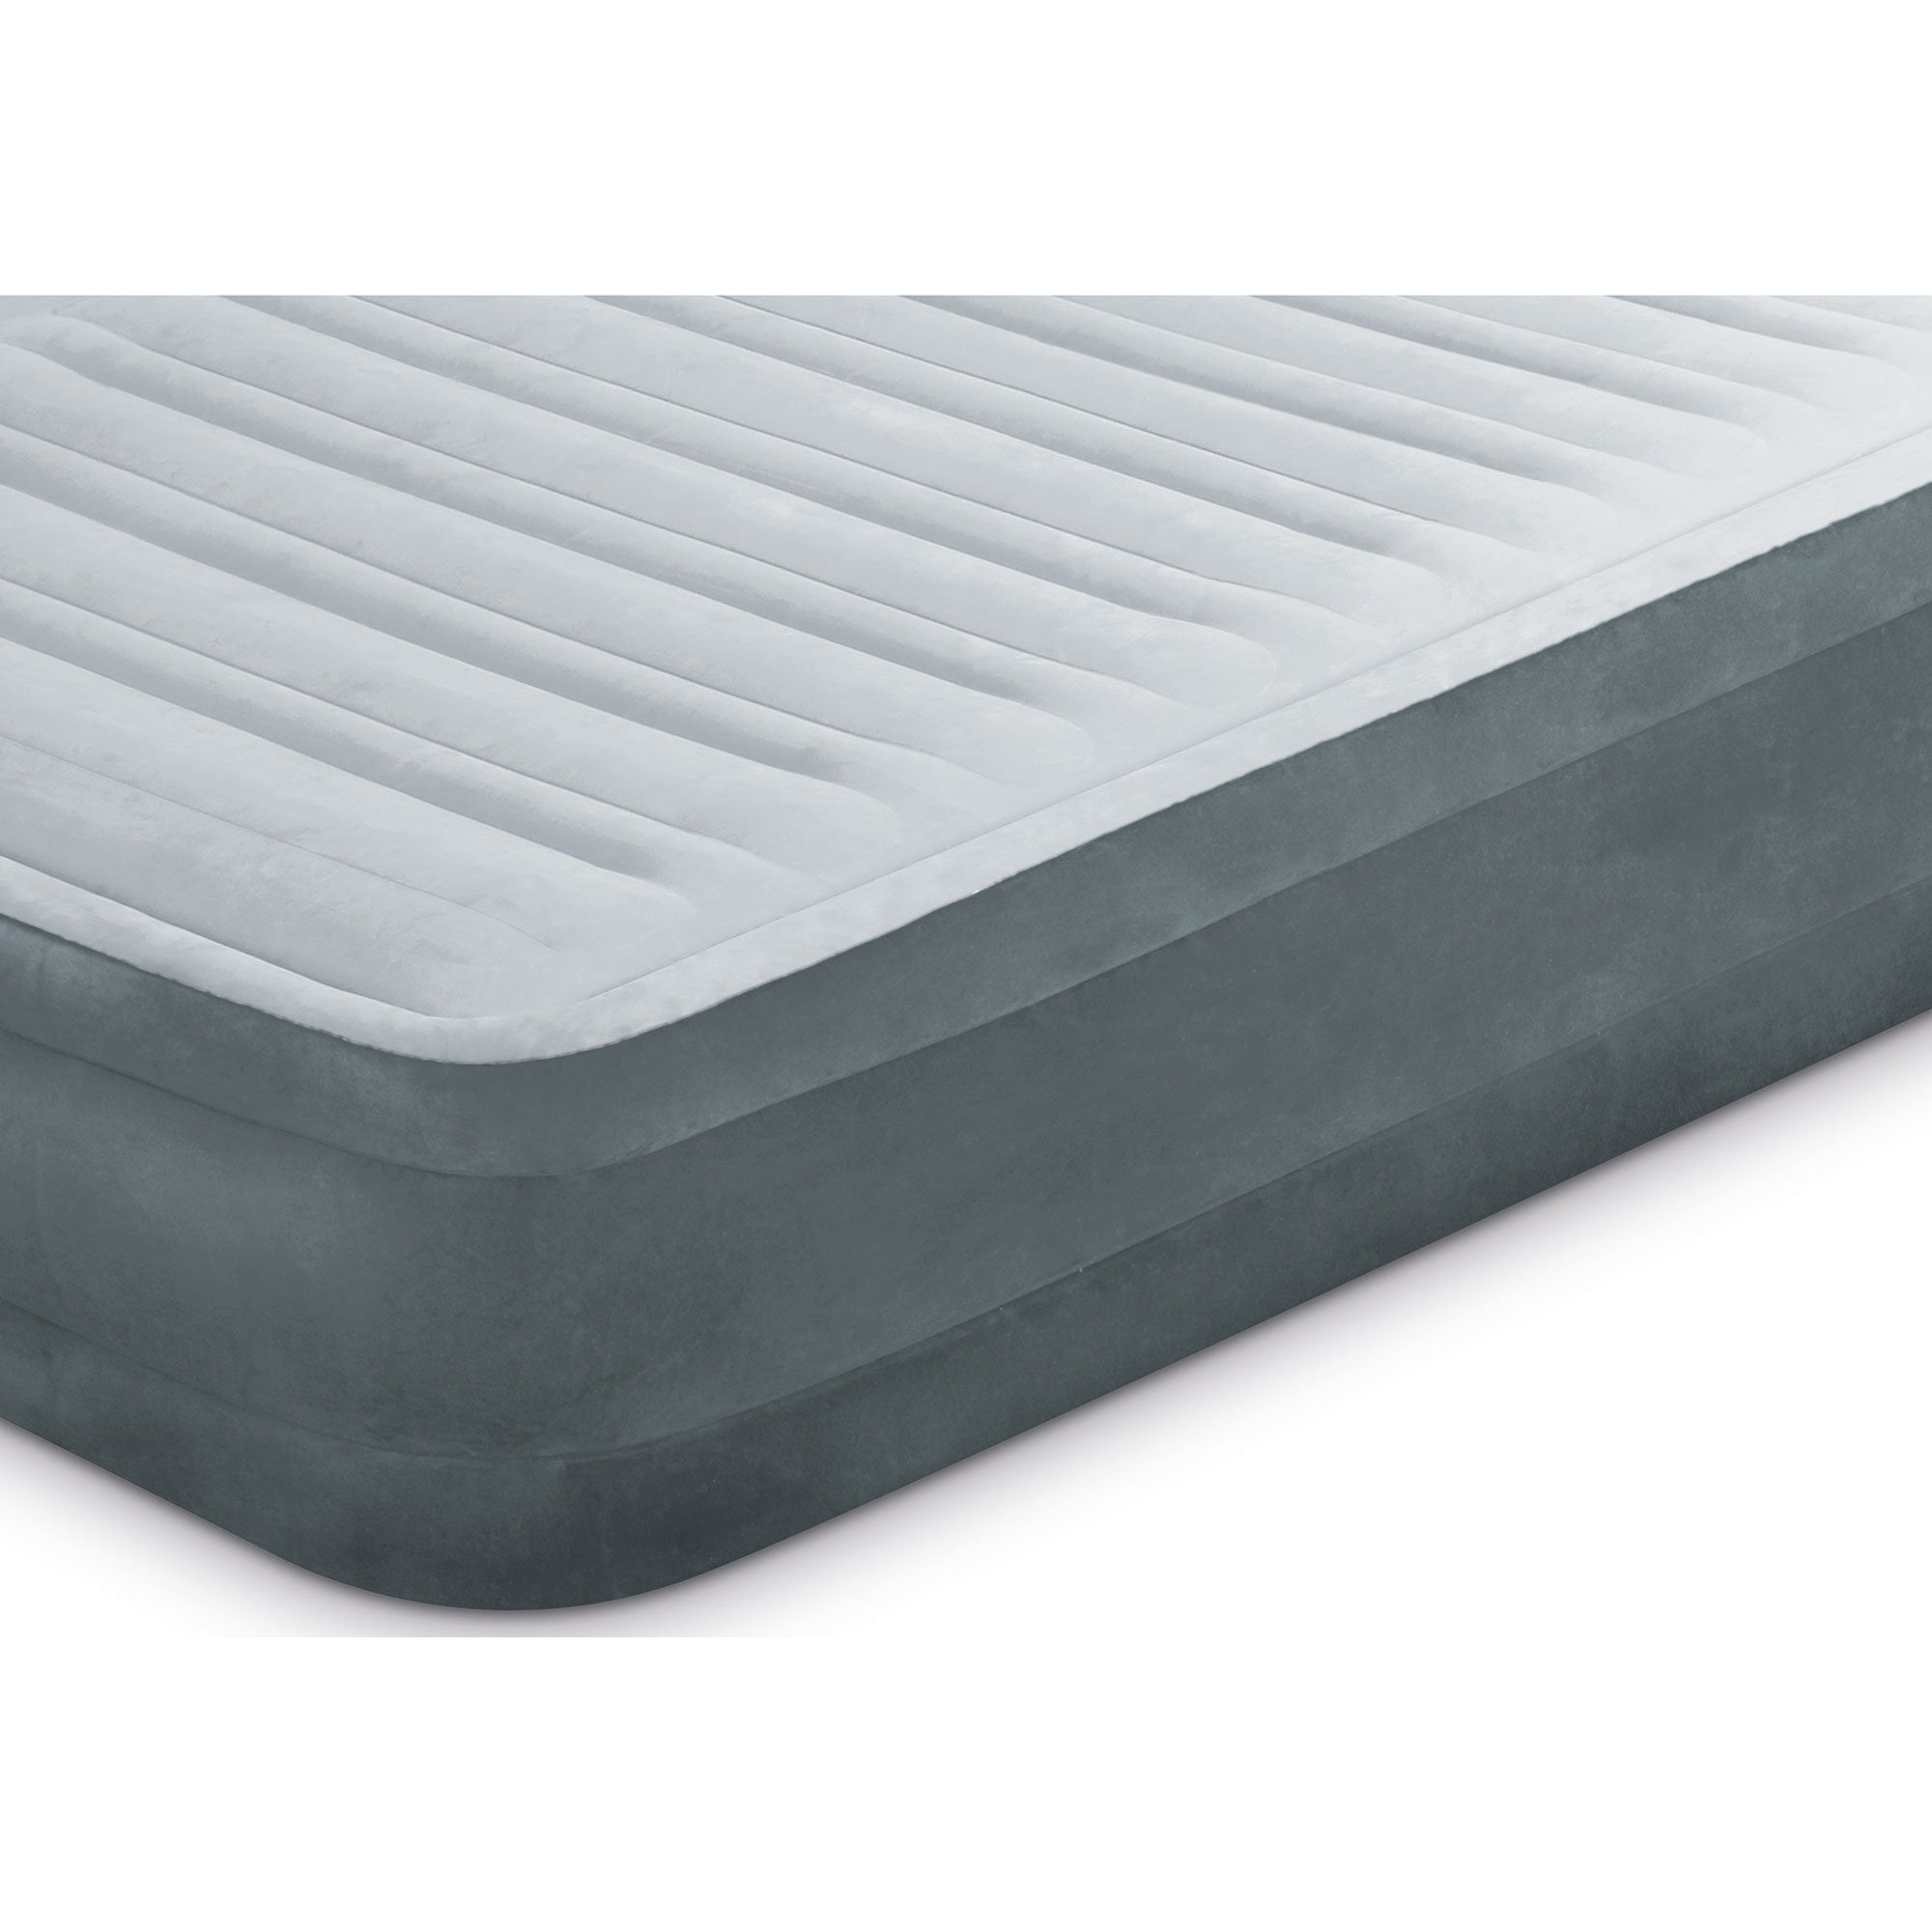 Intex PVC Dura-Beam Series Mid Rise Airbed w/ Built In Electric Pump Used Twin 